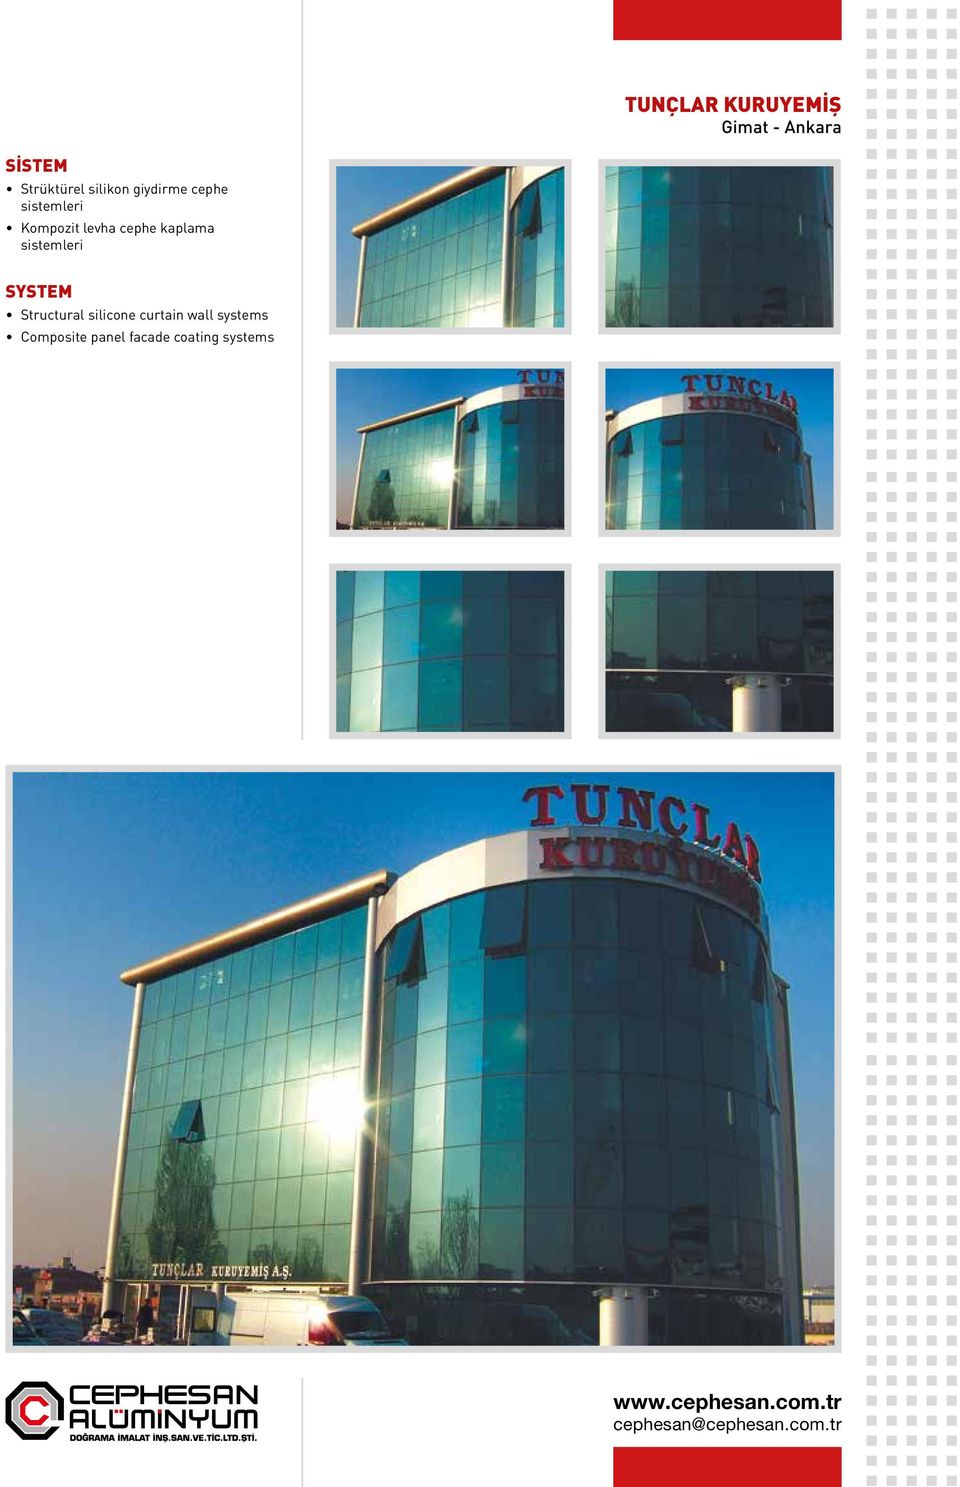 kaplama Structural silicone curtain wall